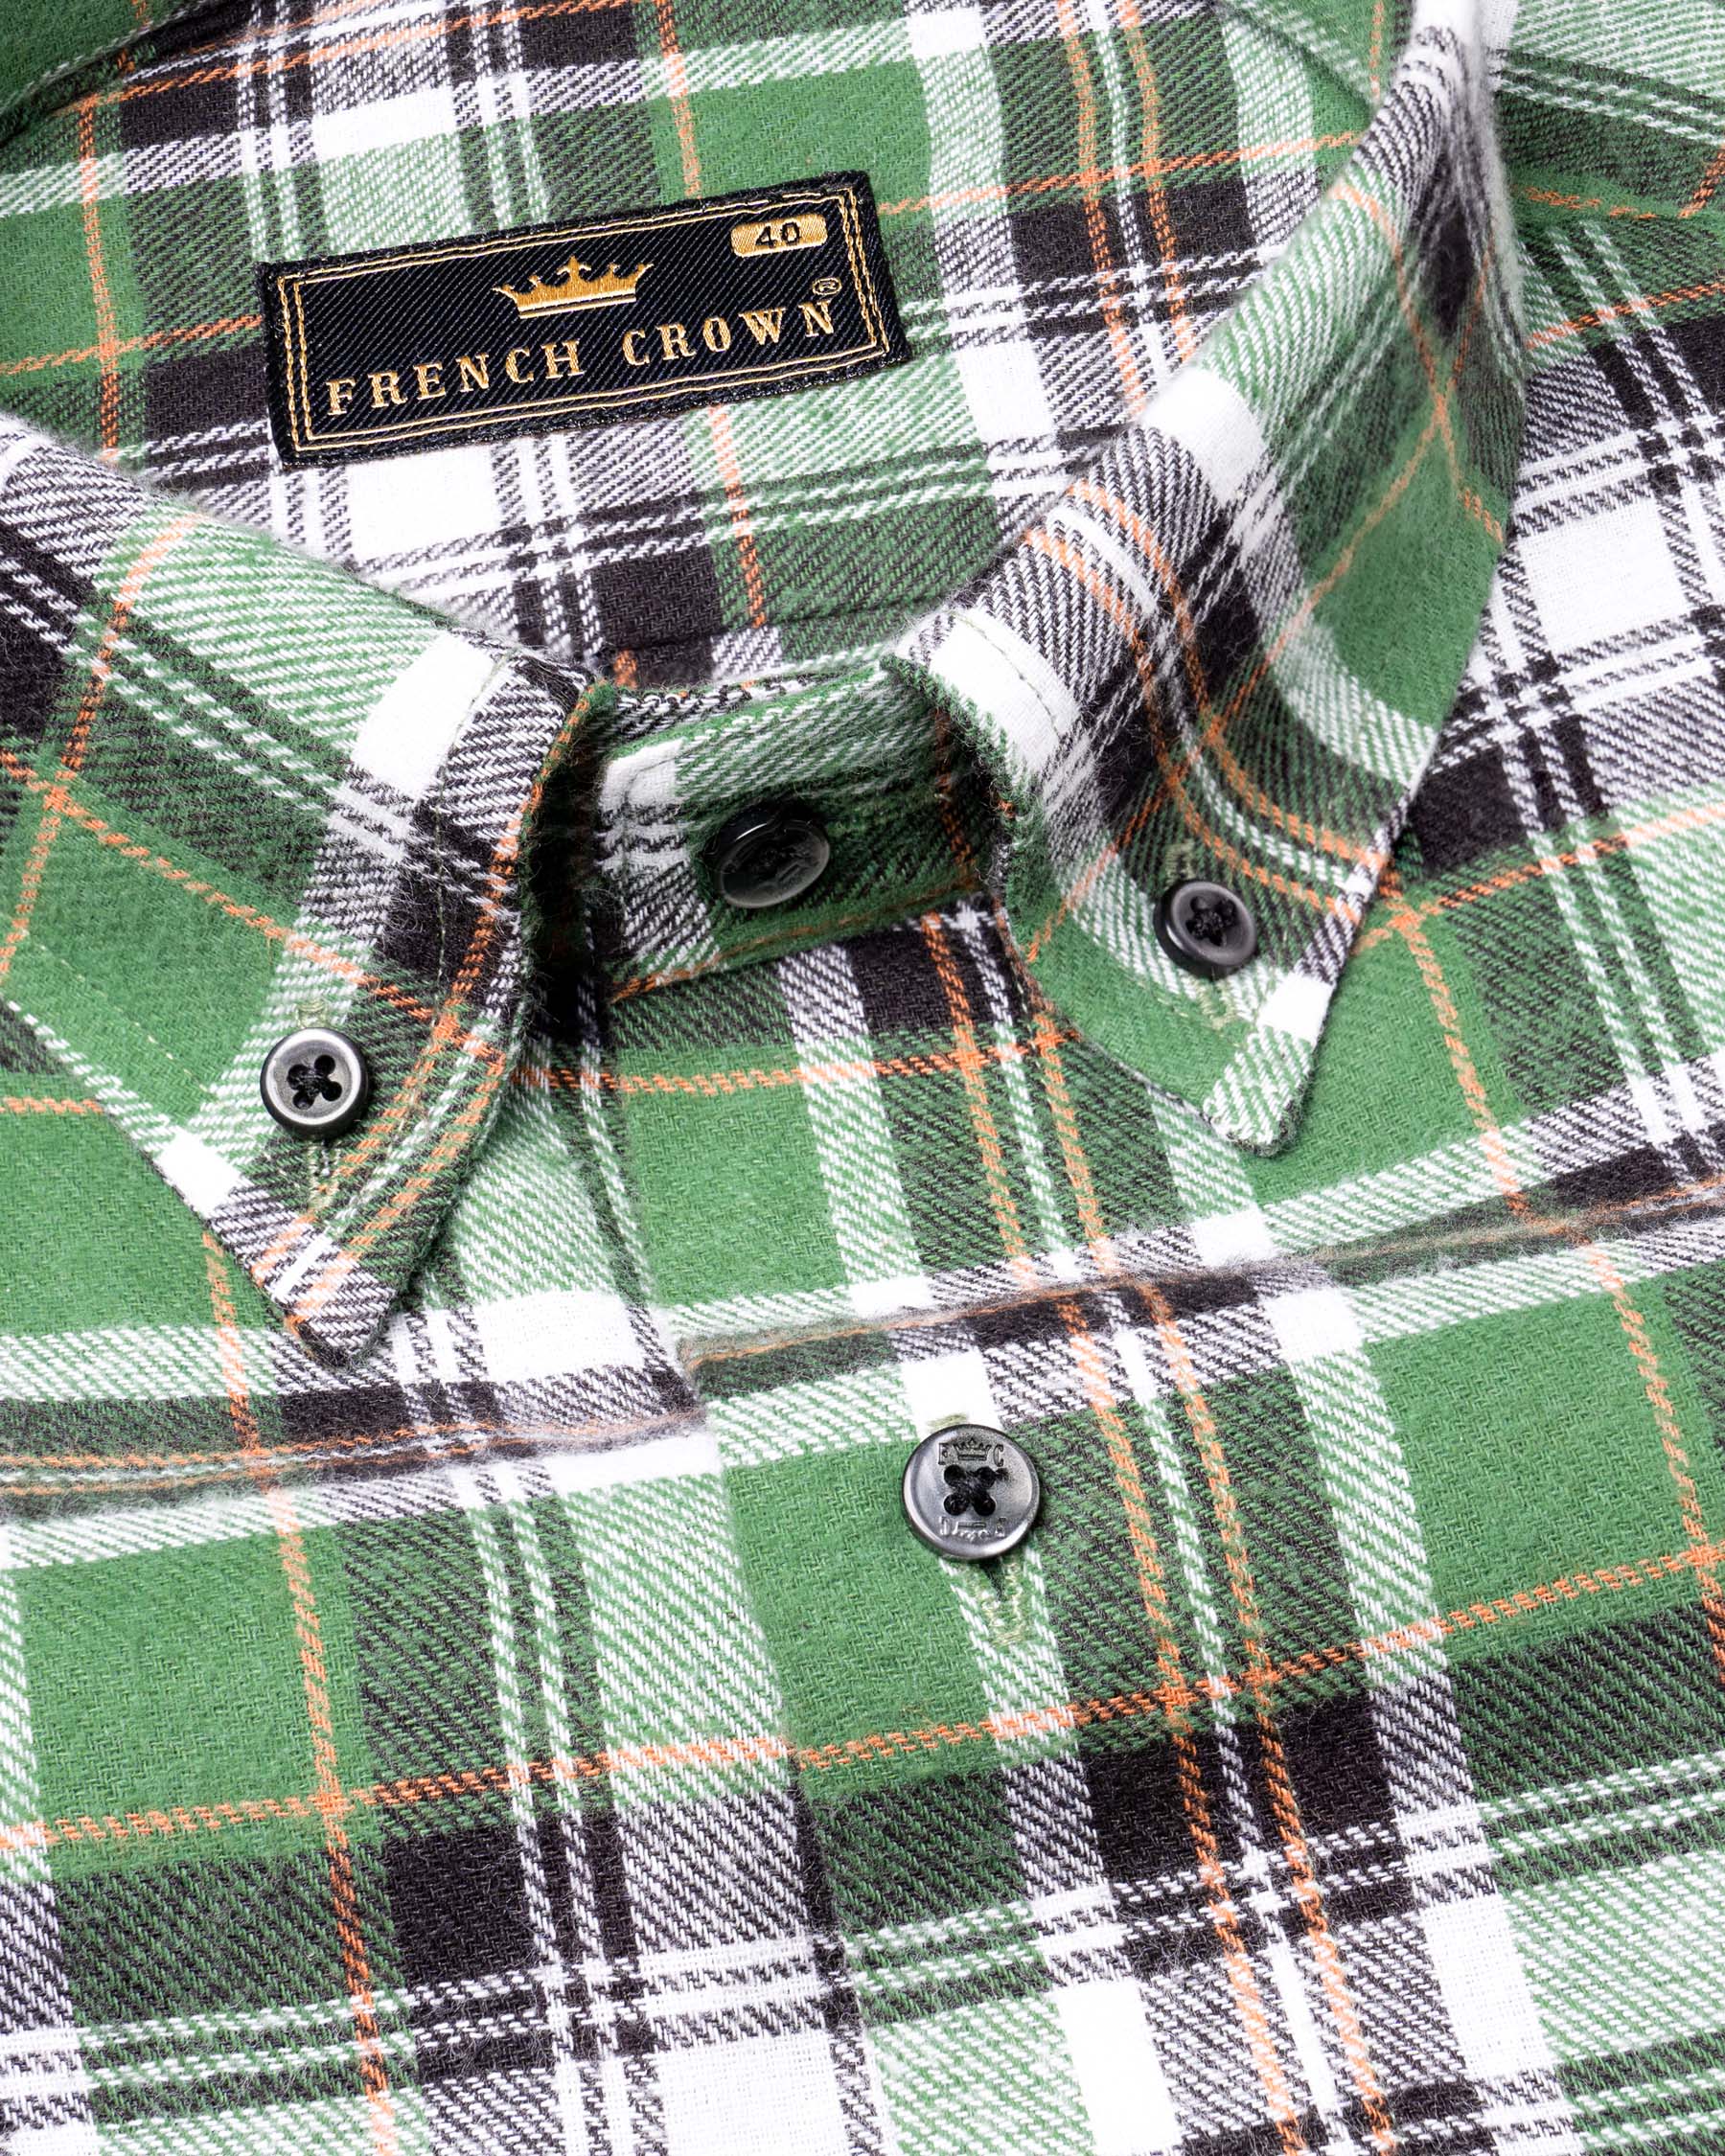 Amulet Green and off white Plaid Flannel Shirt 6900-BD-BLK-38,6900-BD-BLK-38,6900-BD-BLK-39,6900-BD-BLK-39,6900-BD-BLK-40,6900-BD-BLK-40,6900-BD-BLK-42,6900-BD-BLK-42,6900-BD-BLK-44,6900-BD-BLK-44,6900-BD-BLK-46,6900-BD-BLK-46,6900-BD-BLK-48,6900-BD-BLK-48,6900-BD-BLK-50,6900-BD-BLK-50,6900-BD-BLK-52,6900-BD-BLK-52